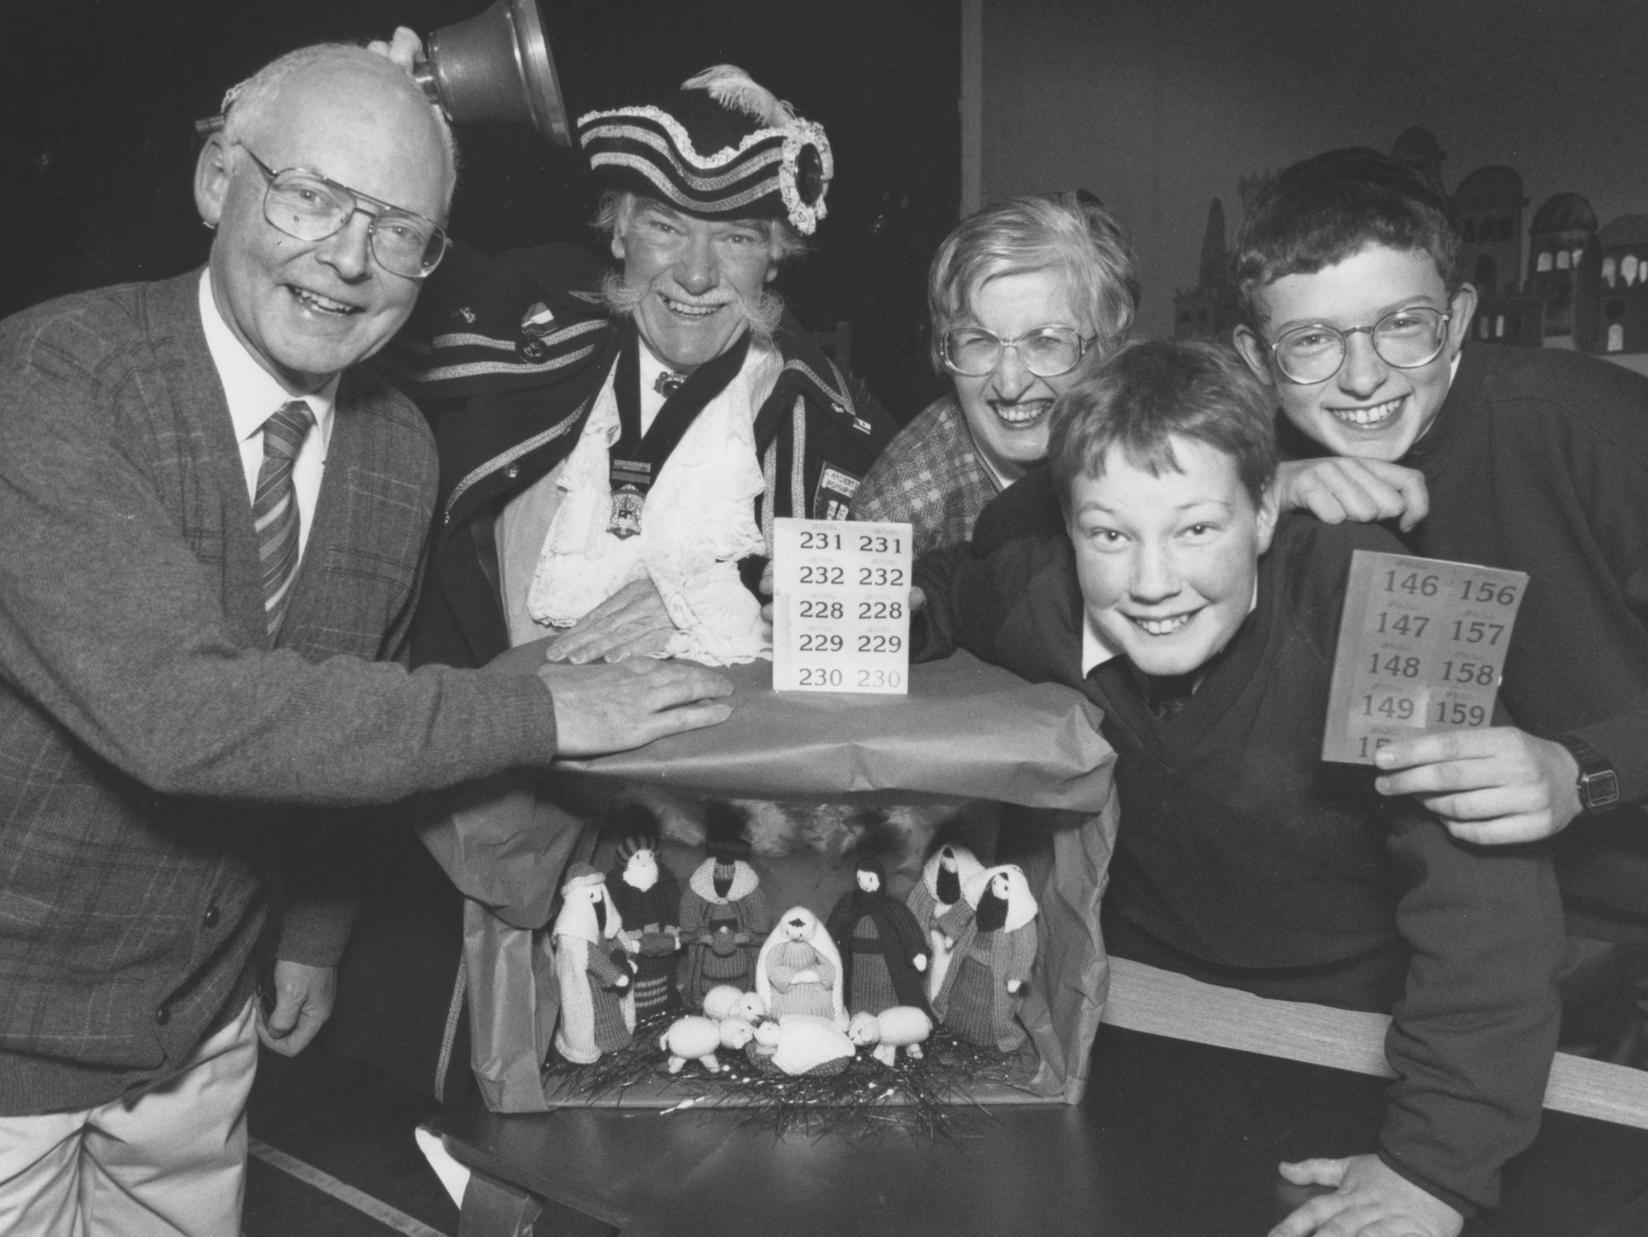 Joining forces to raffle a Nativity set at St Augustine's Christmas fair in December 1997 are head teacher Keith Bear, town crier Alan Booth, Mrs Jean Bear, and pupils Chris Fletcher and Robert Bear. Mrs Bear also made the Nativity set.